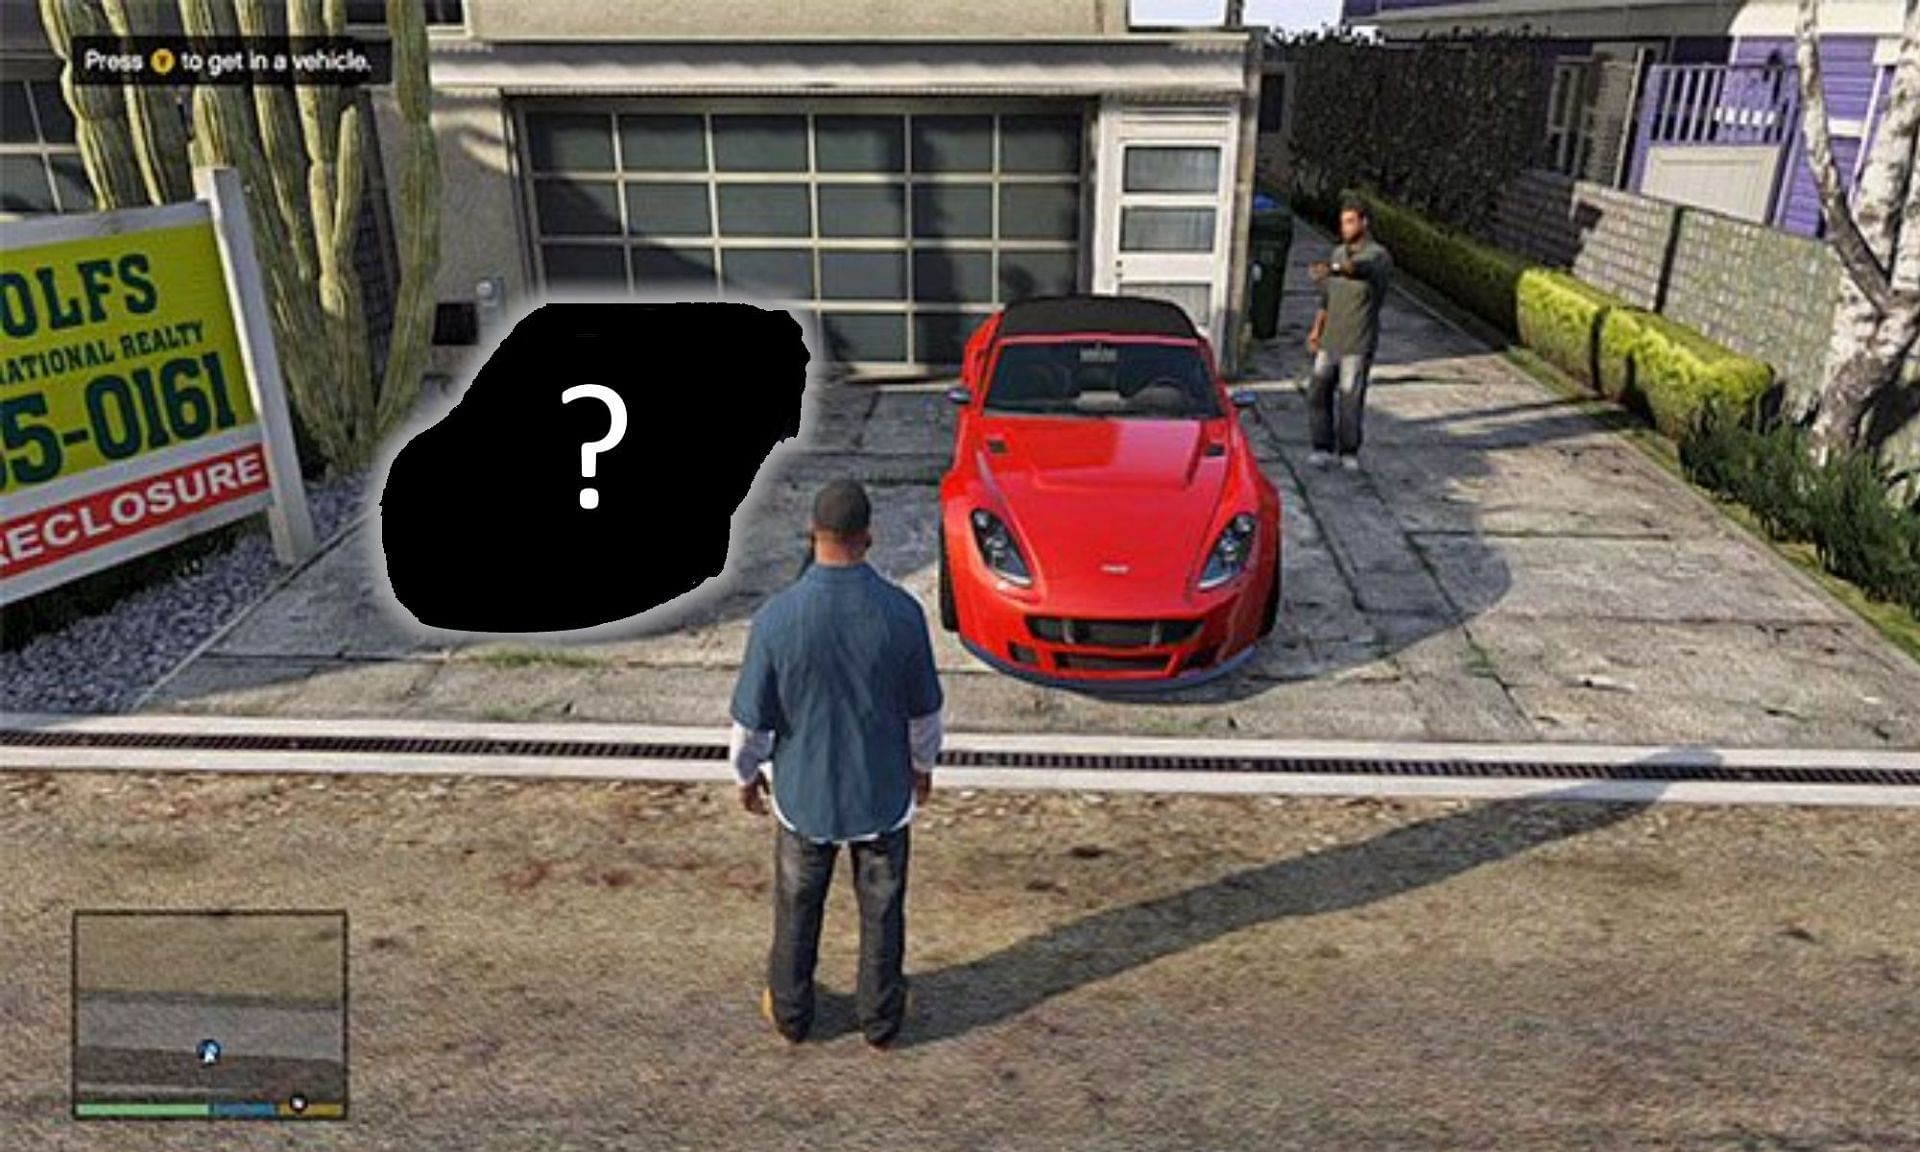 Sometimes GTA 5 vehicles disappear without a trace (Image via Sportskeeda)